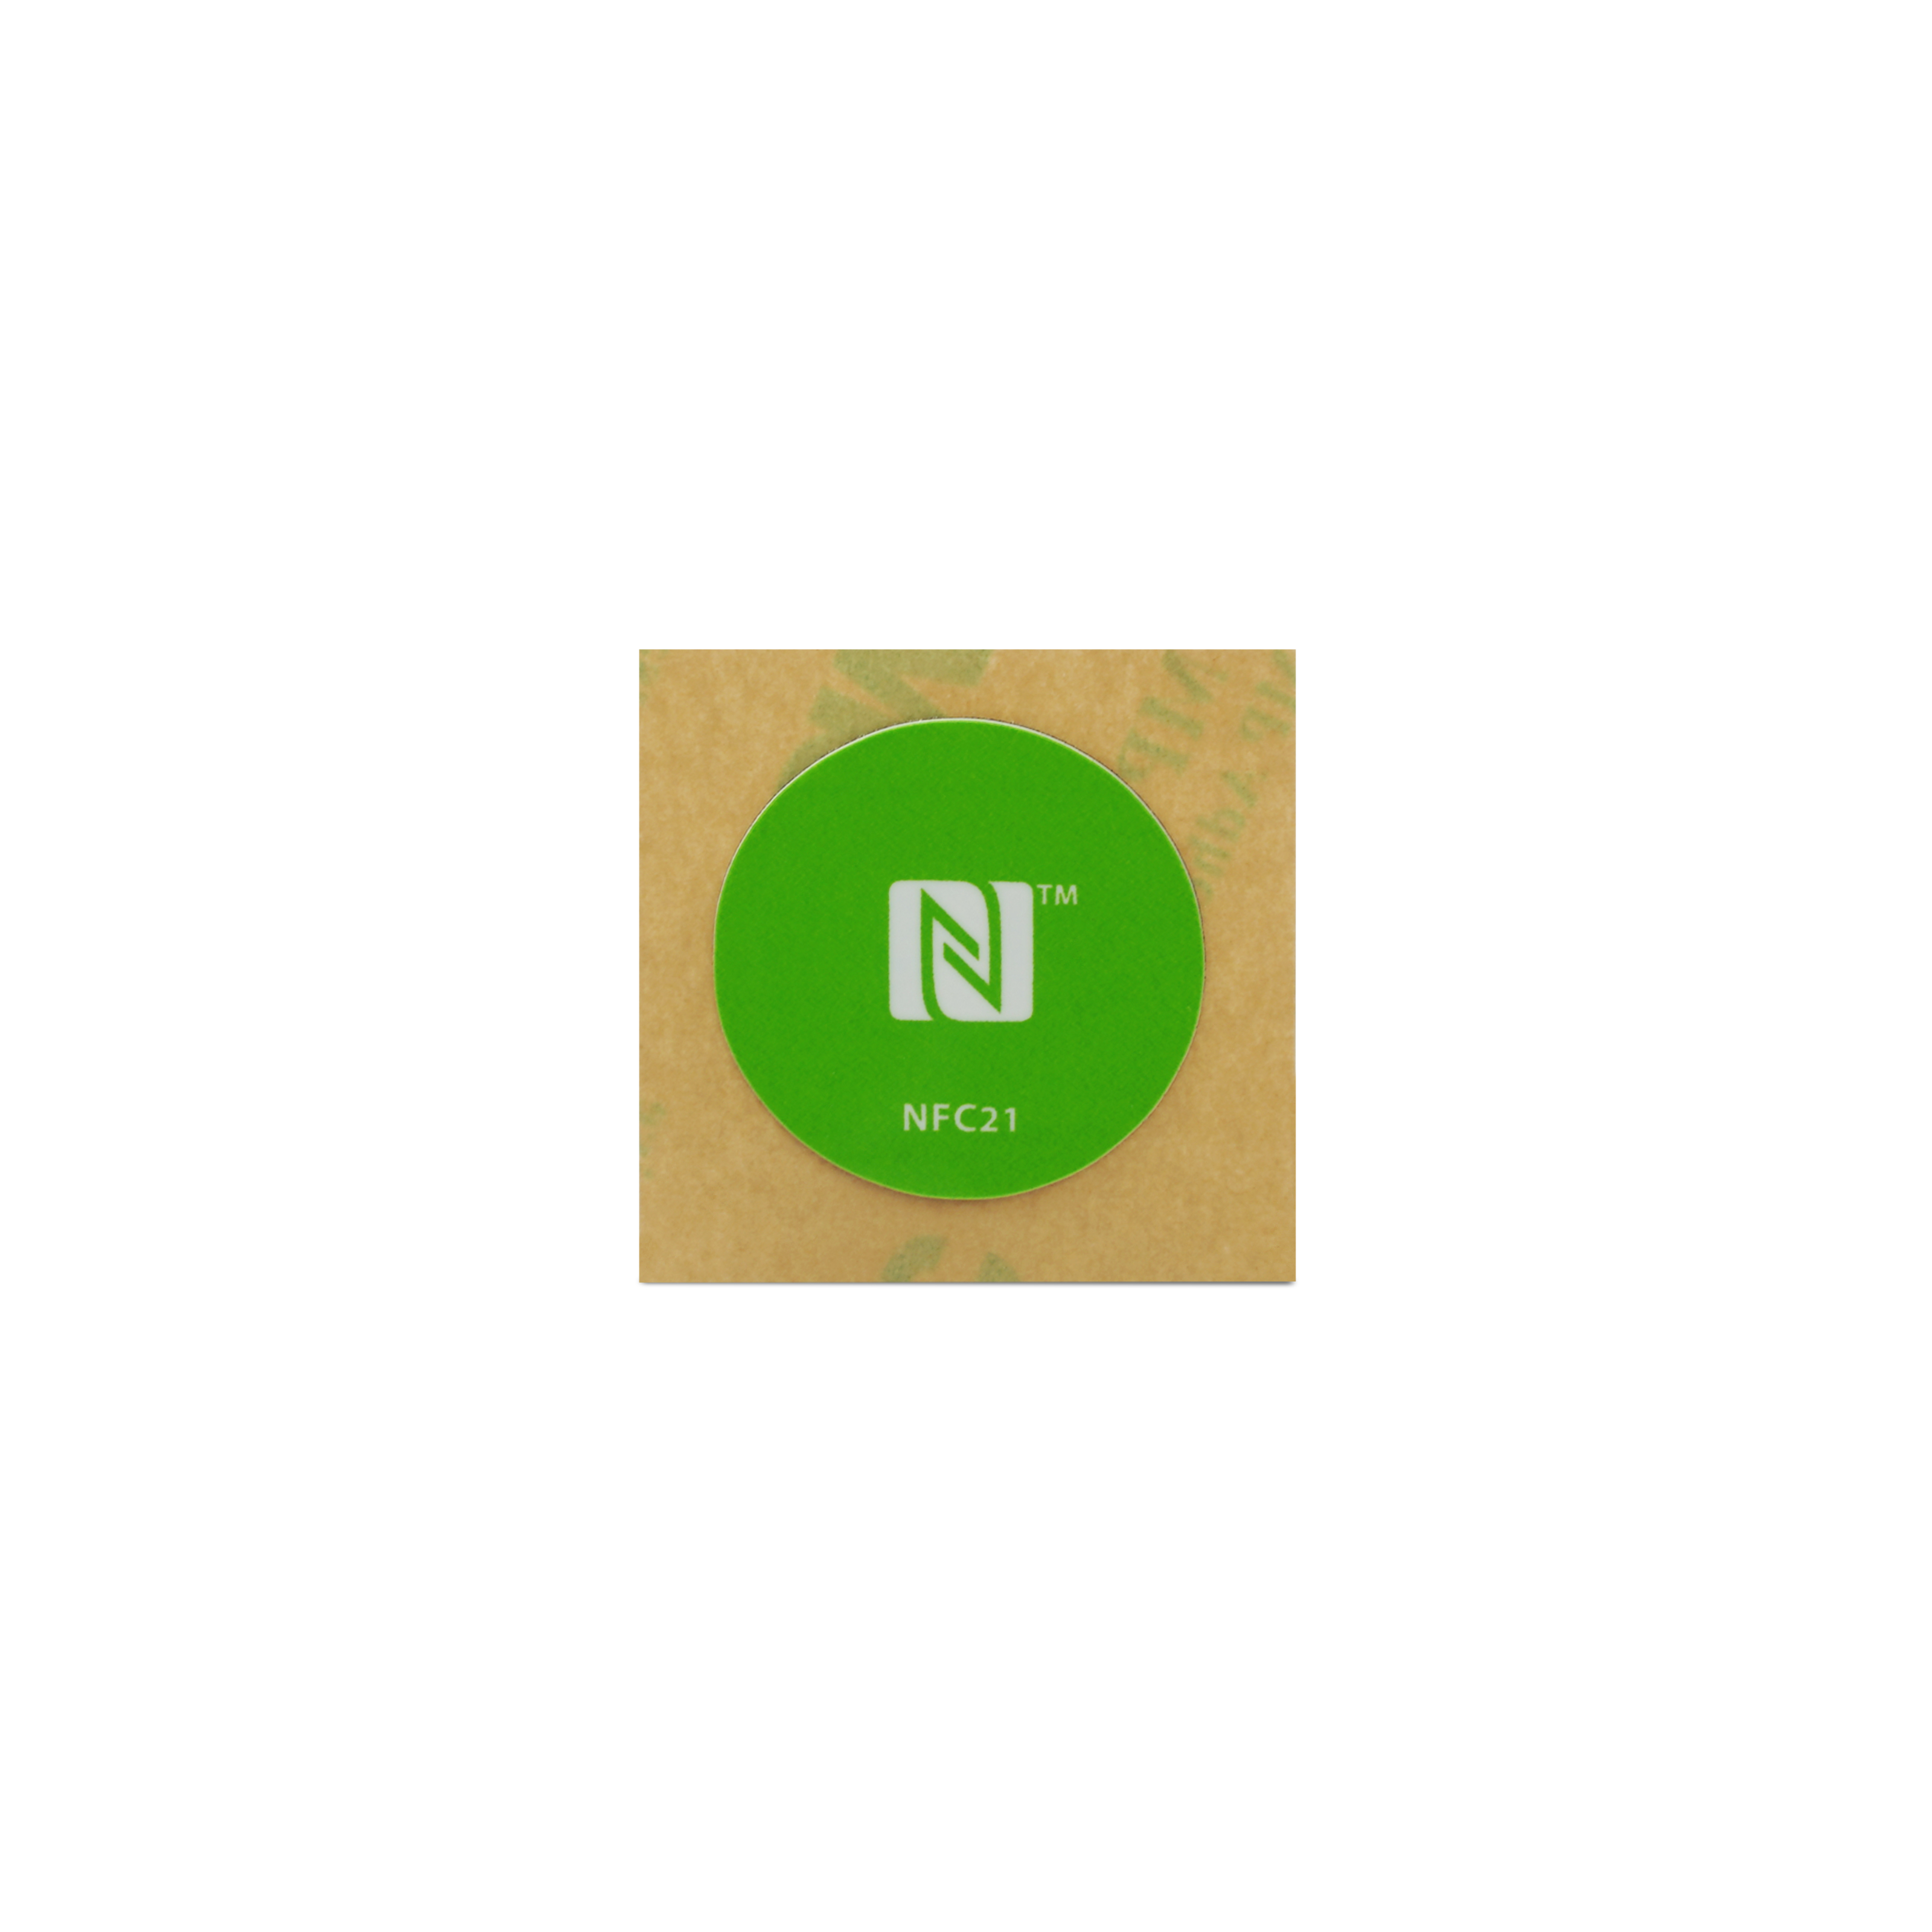 NFC Sticker On-Metal - 22 mm - NTAG213 - 180 Byte - green with logo